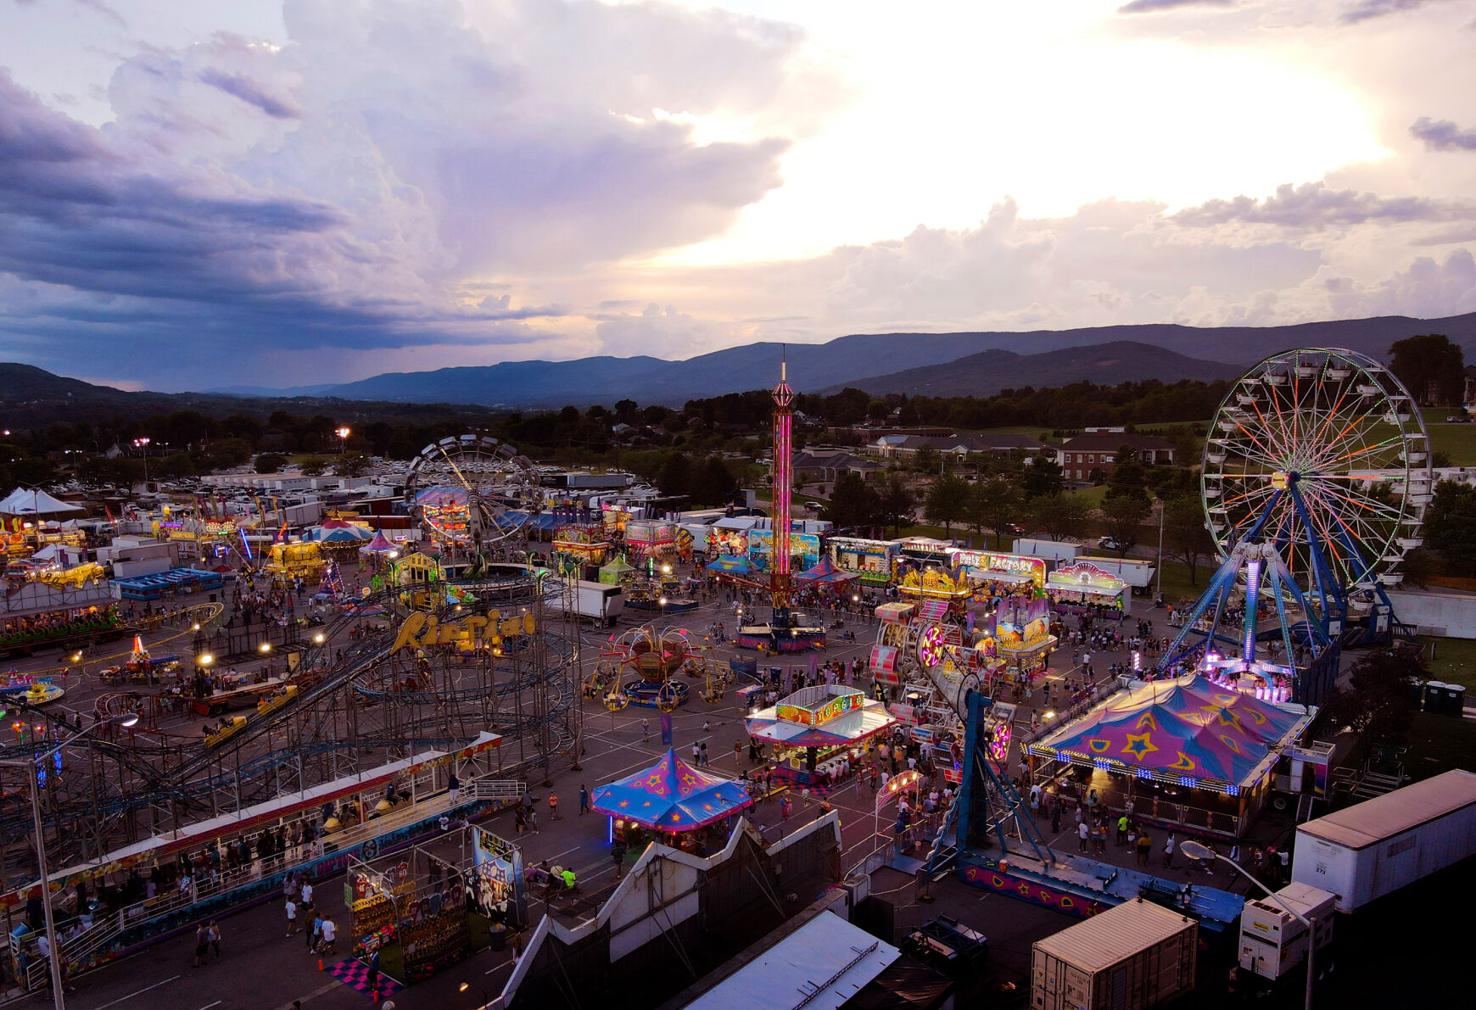 Photos and video: Scenes from the 2021 Salem Fair